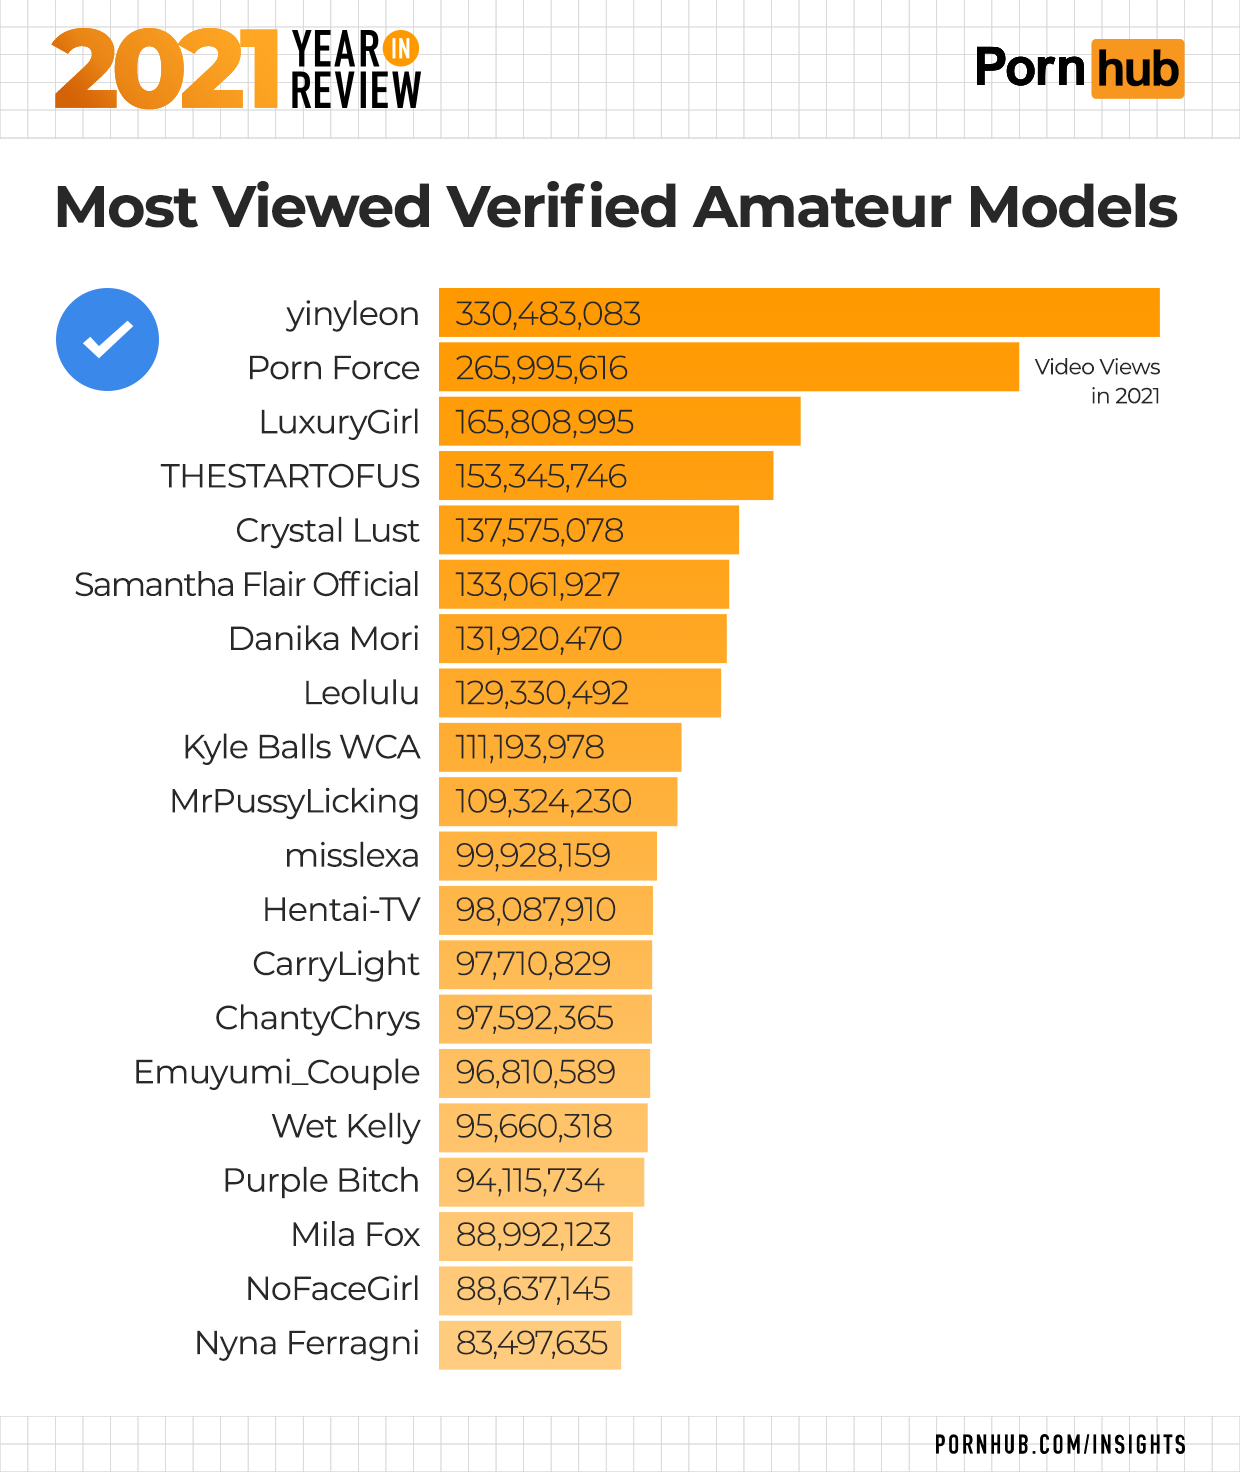 Most watched porn video ever